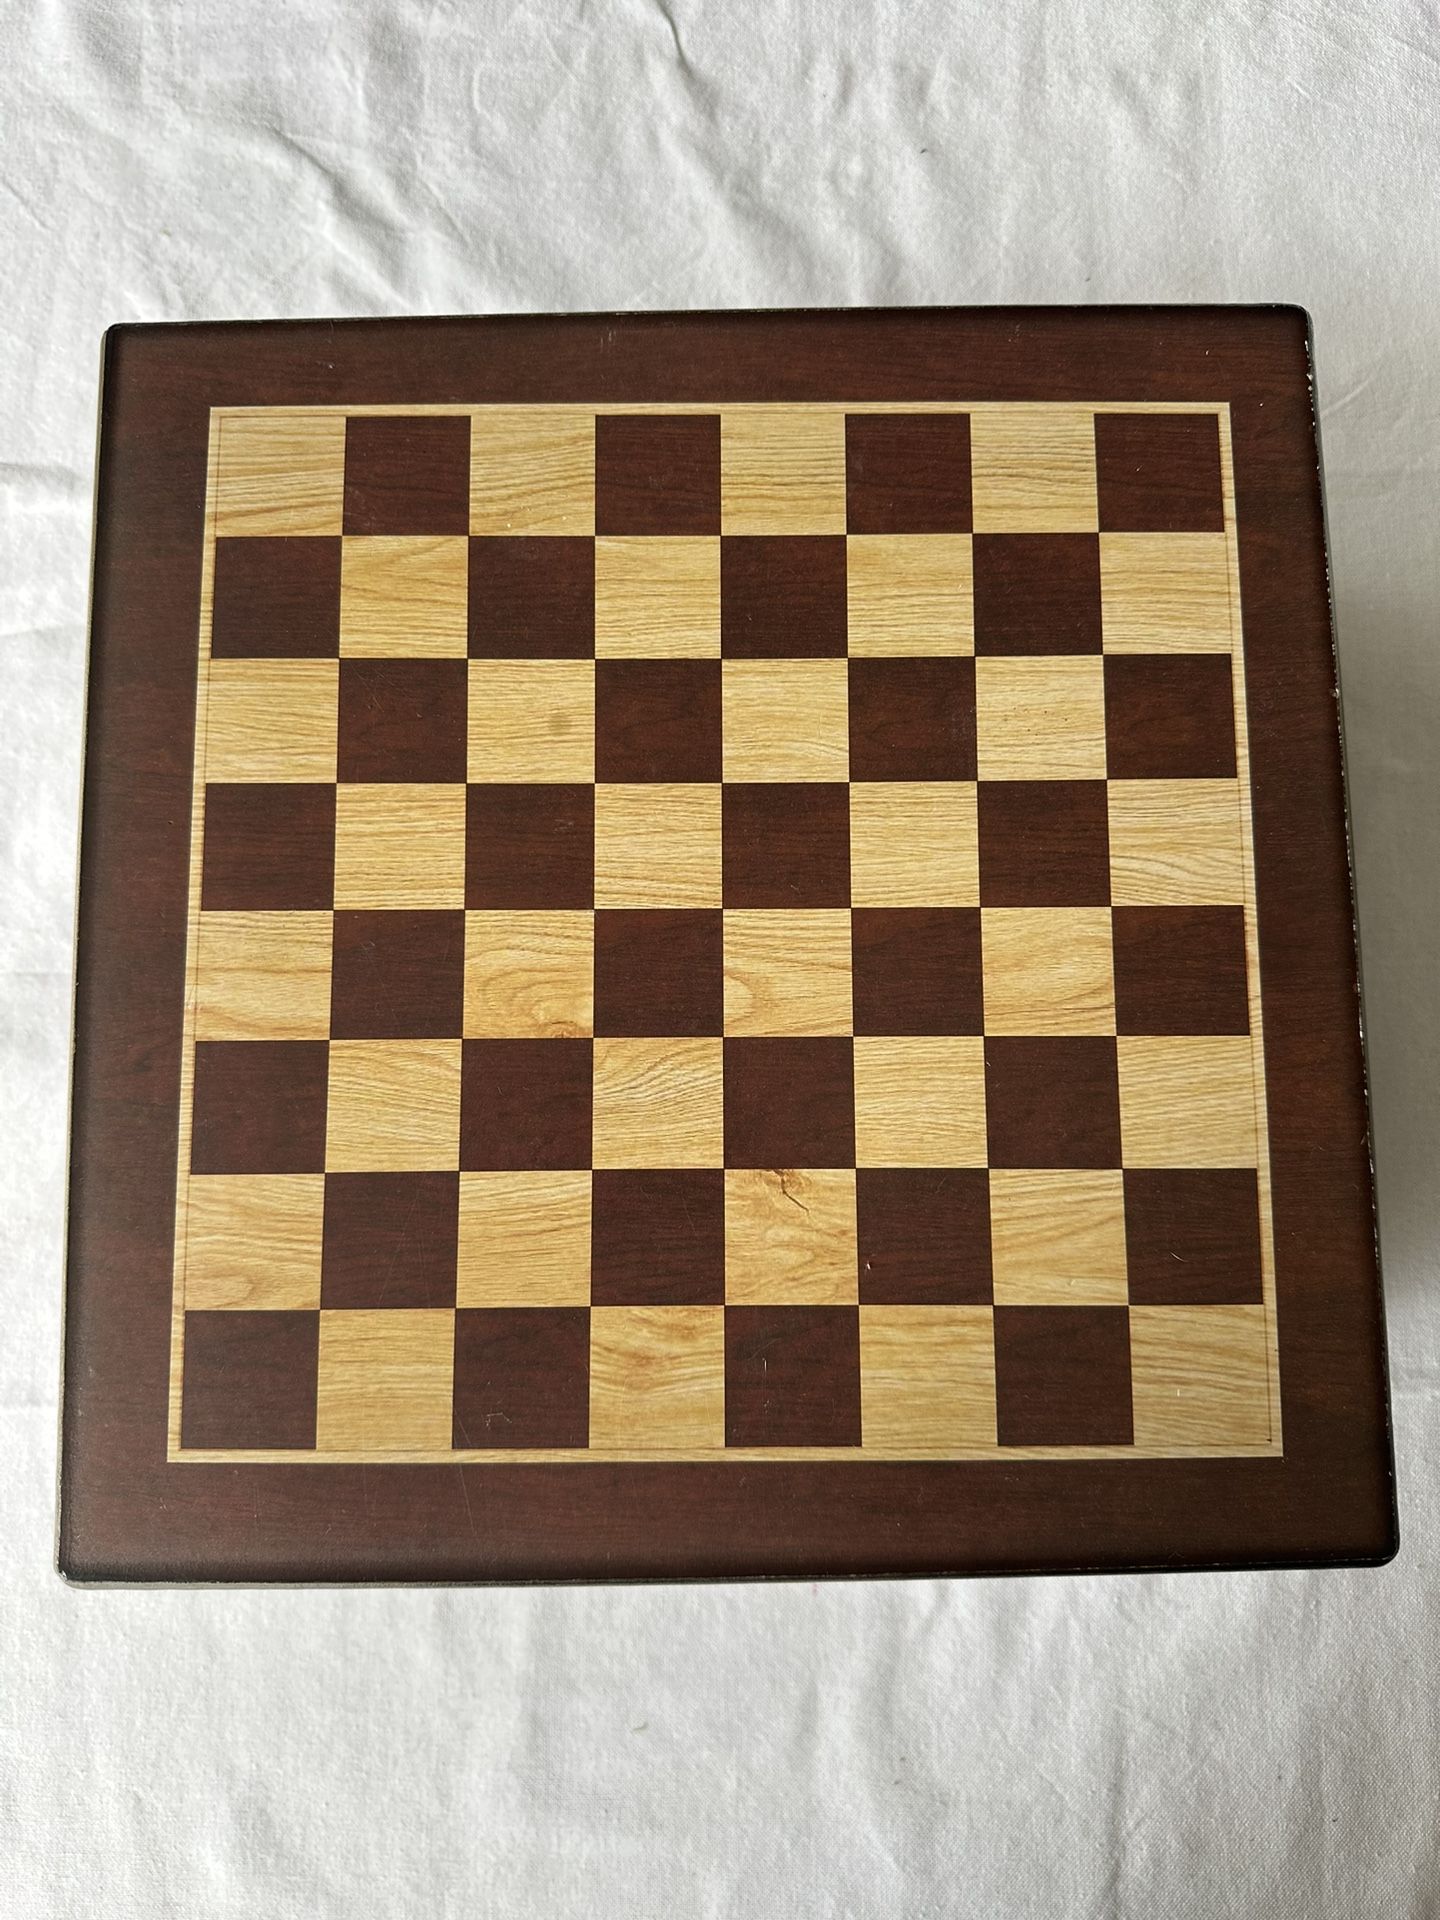 Game Board Gallery Chess Chinese Checkers Snakes And Ladders Backgammon